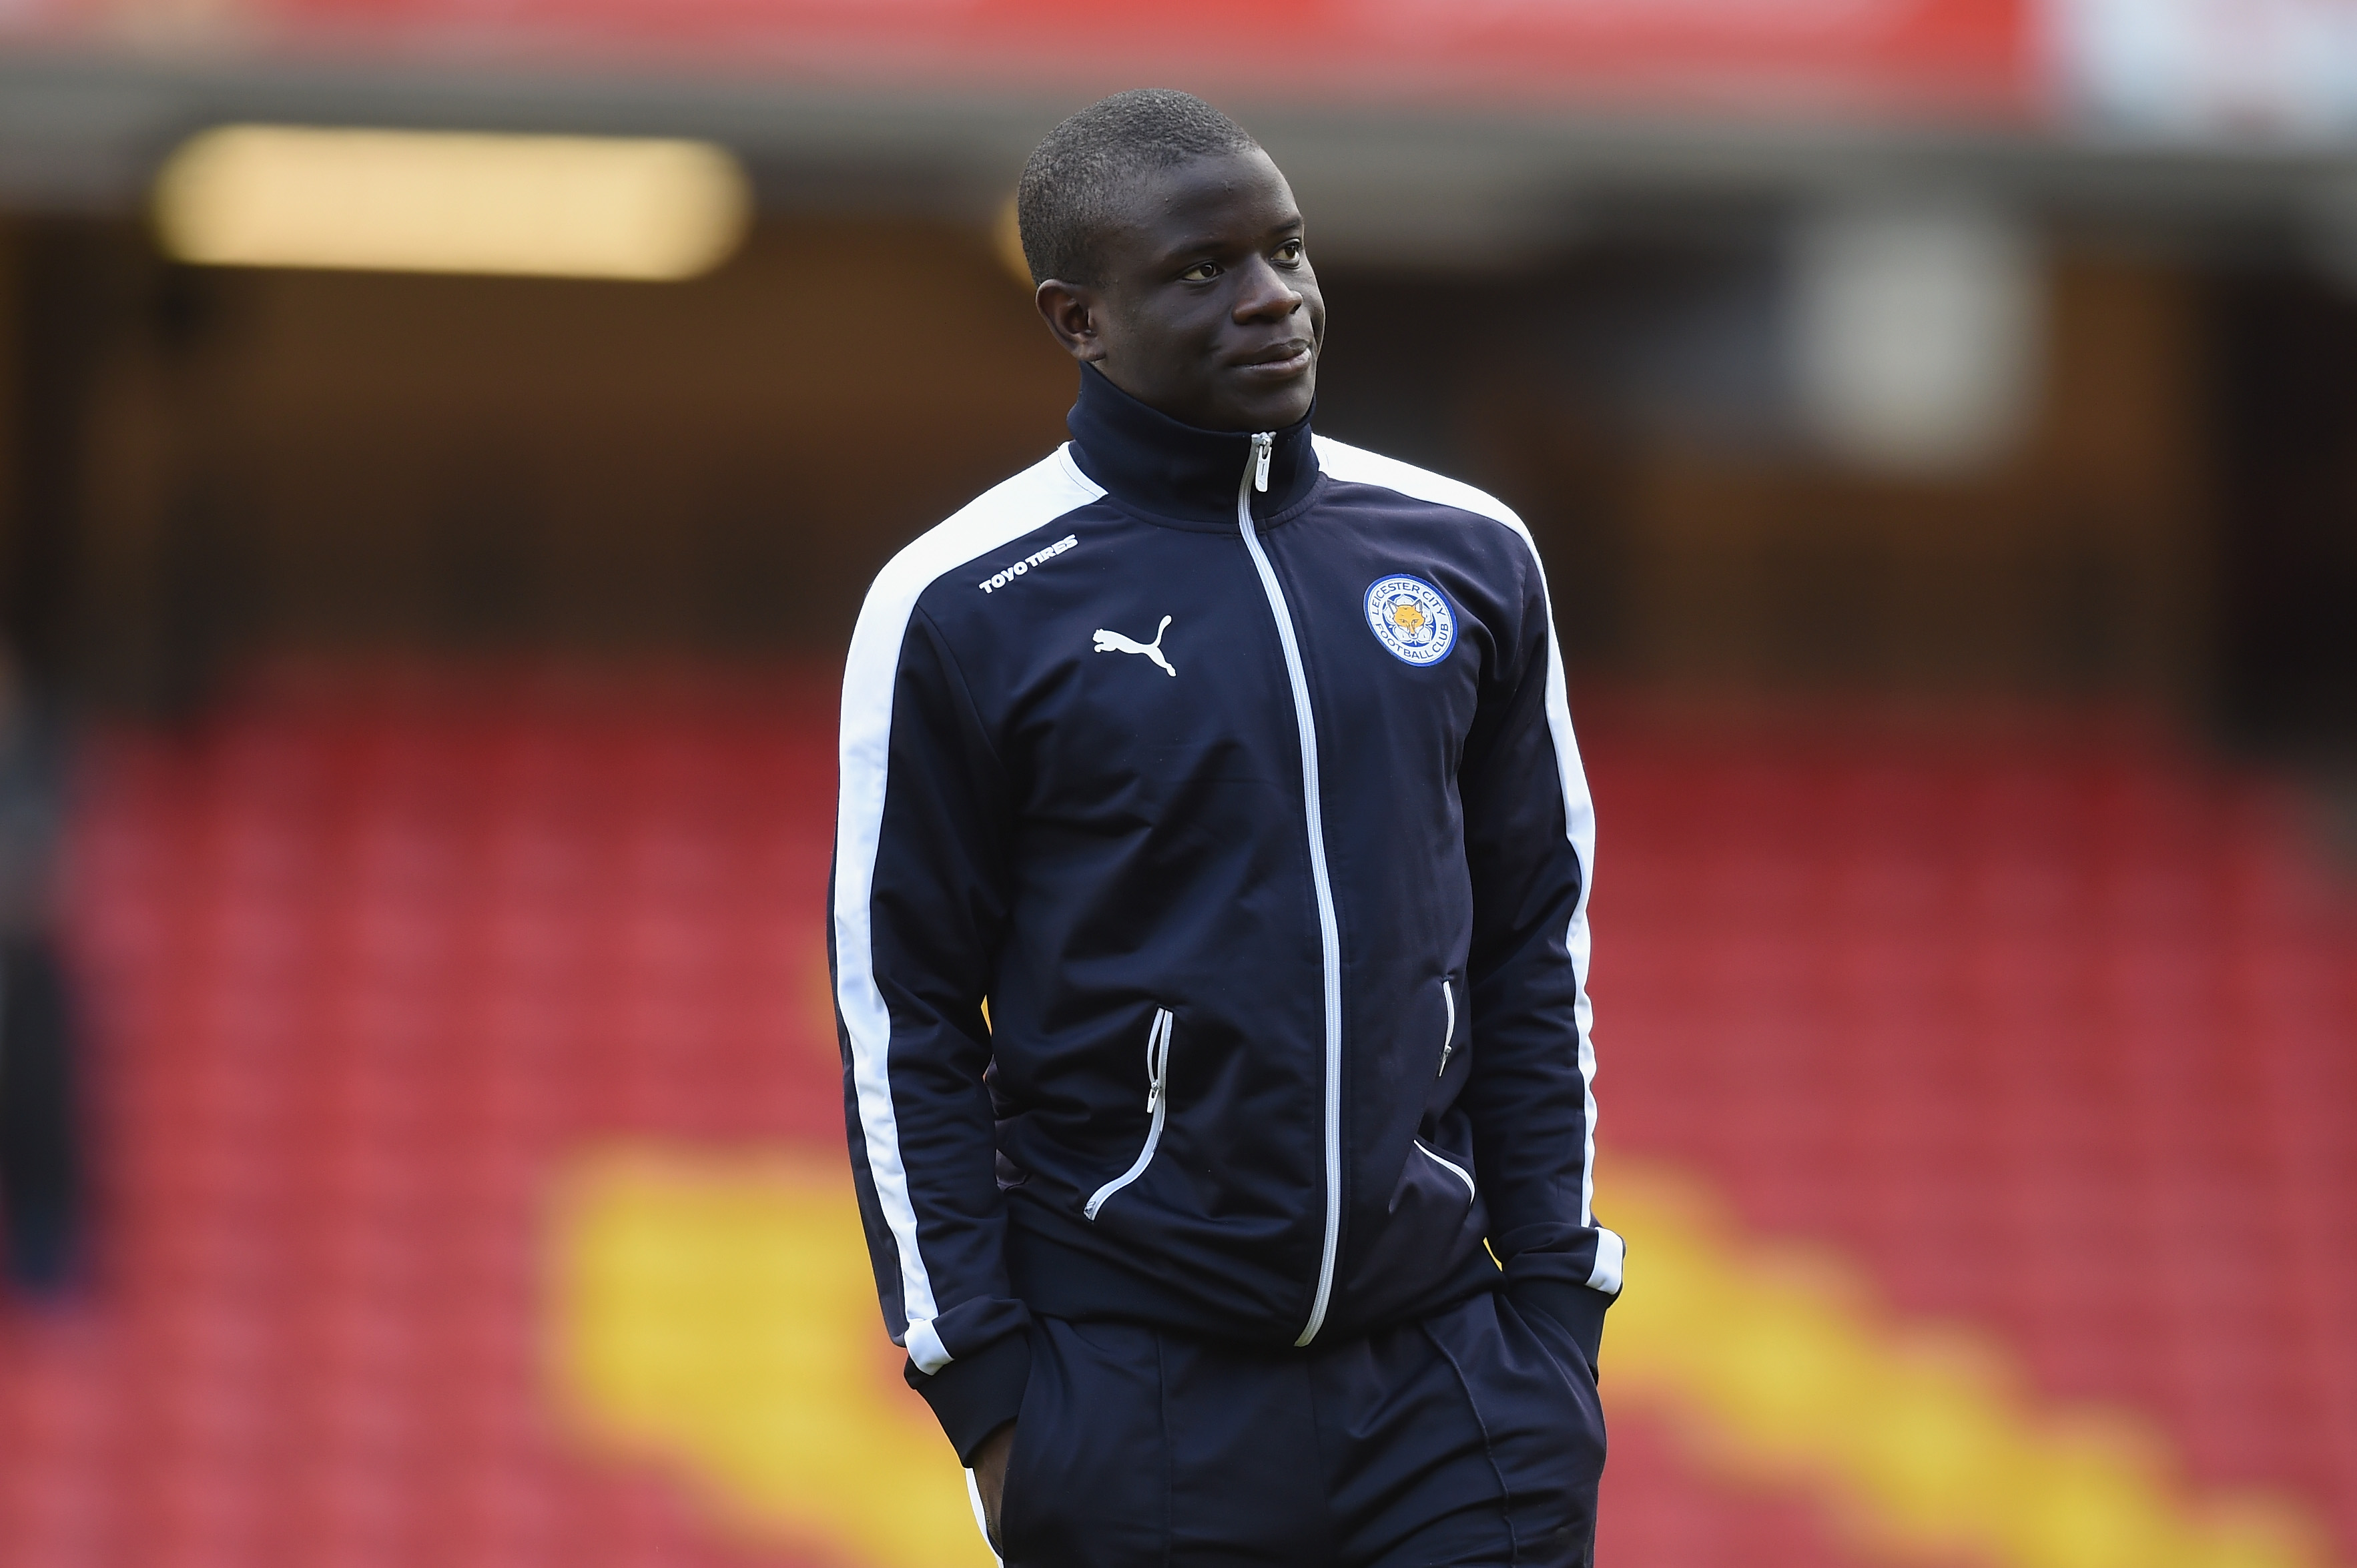 WATFORD, ENGLAND - MARCH 05:  Ngolo Kante of Leicester City looks on prior to the Barclays Premier League match between Watford and Leicester City at Vicarage Road on March 5, 2016 in Watford, England.  (Photo by Michael Regan/Getty Images)